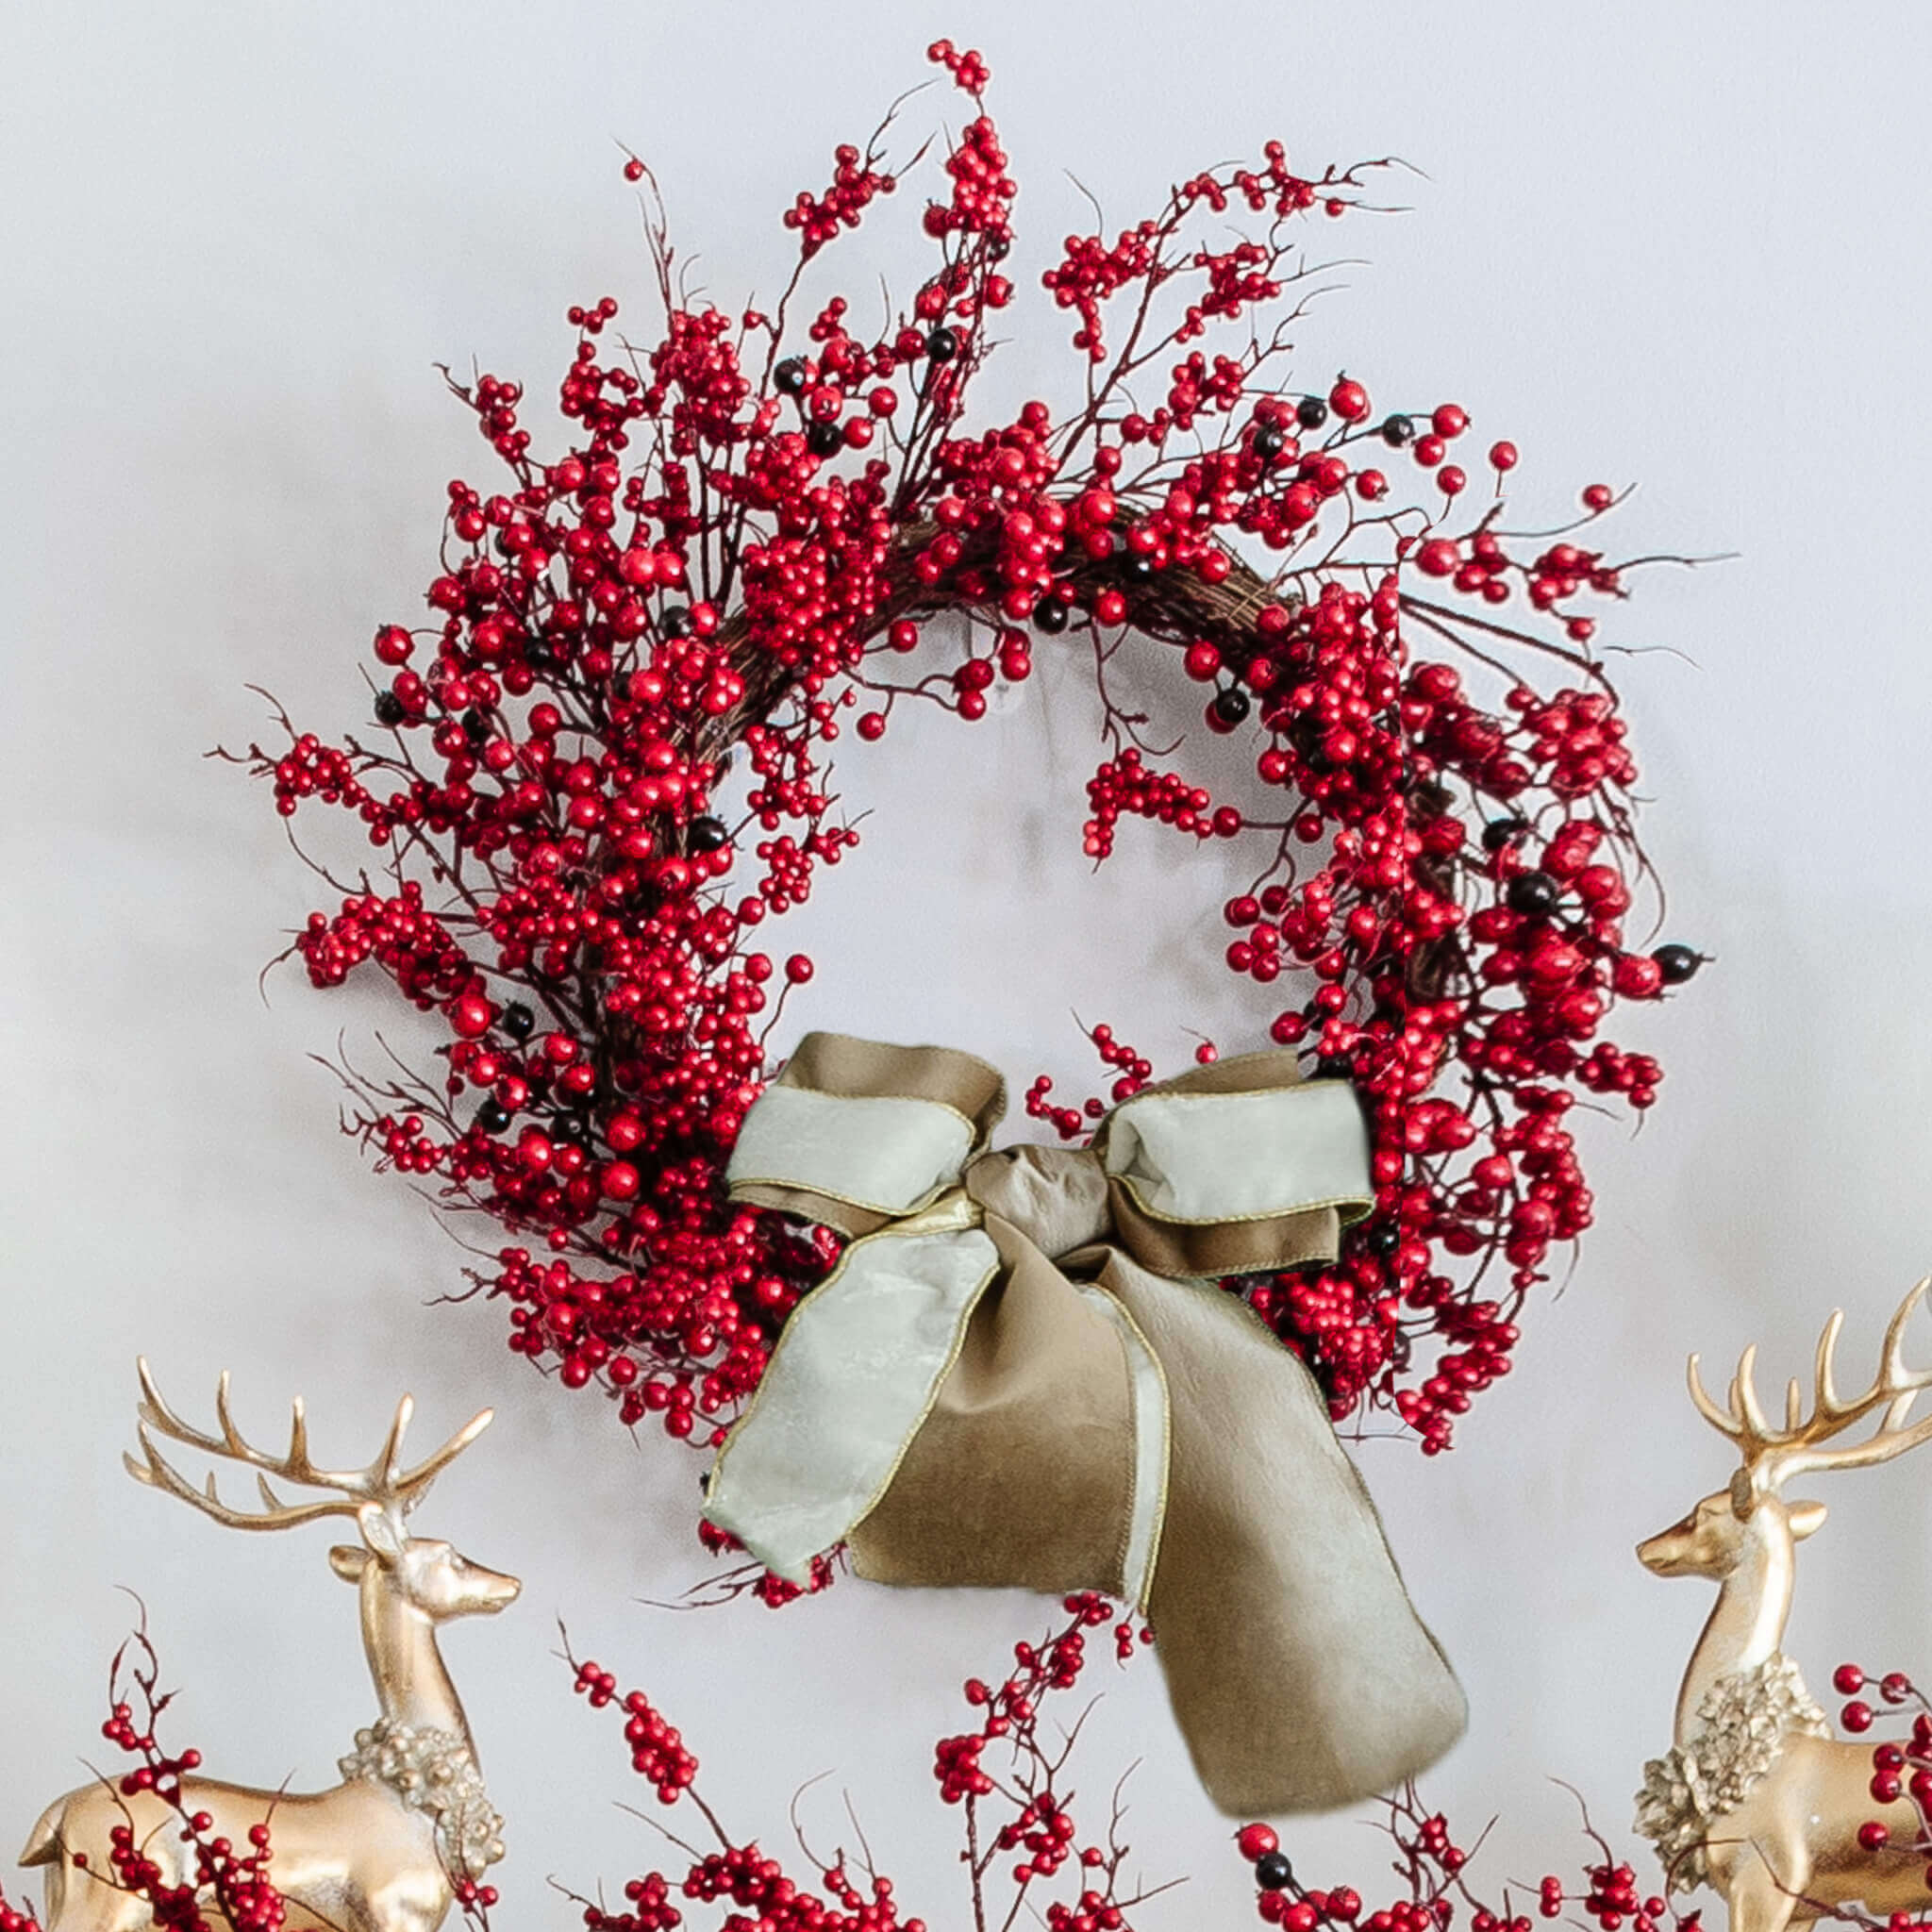 Red Berry & Frosted Pine Cone Wreath 24